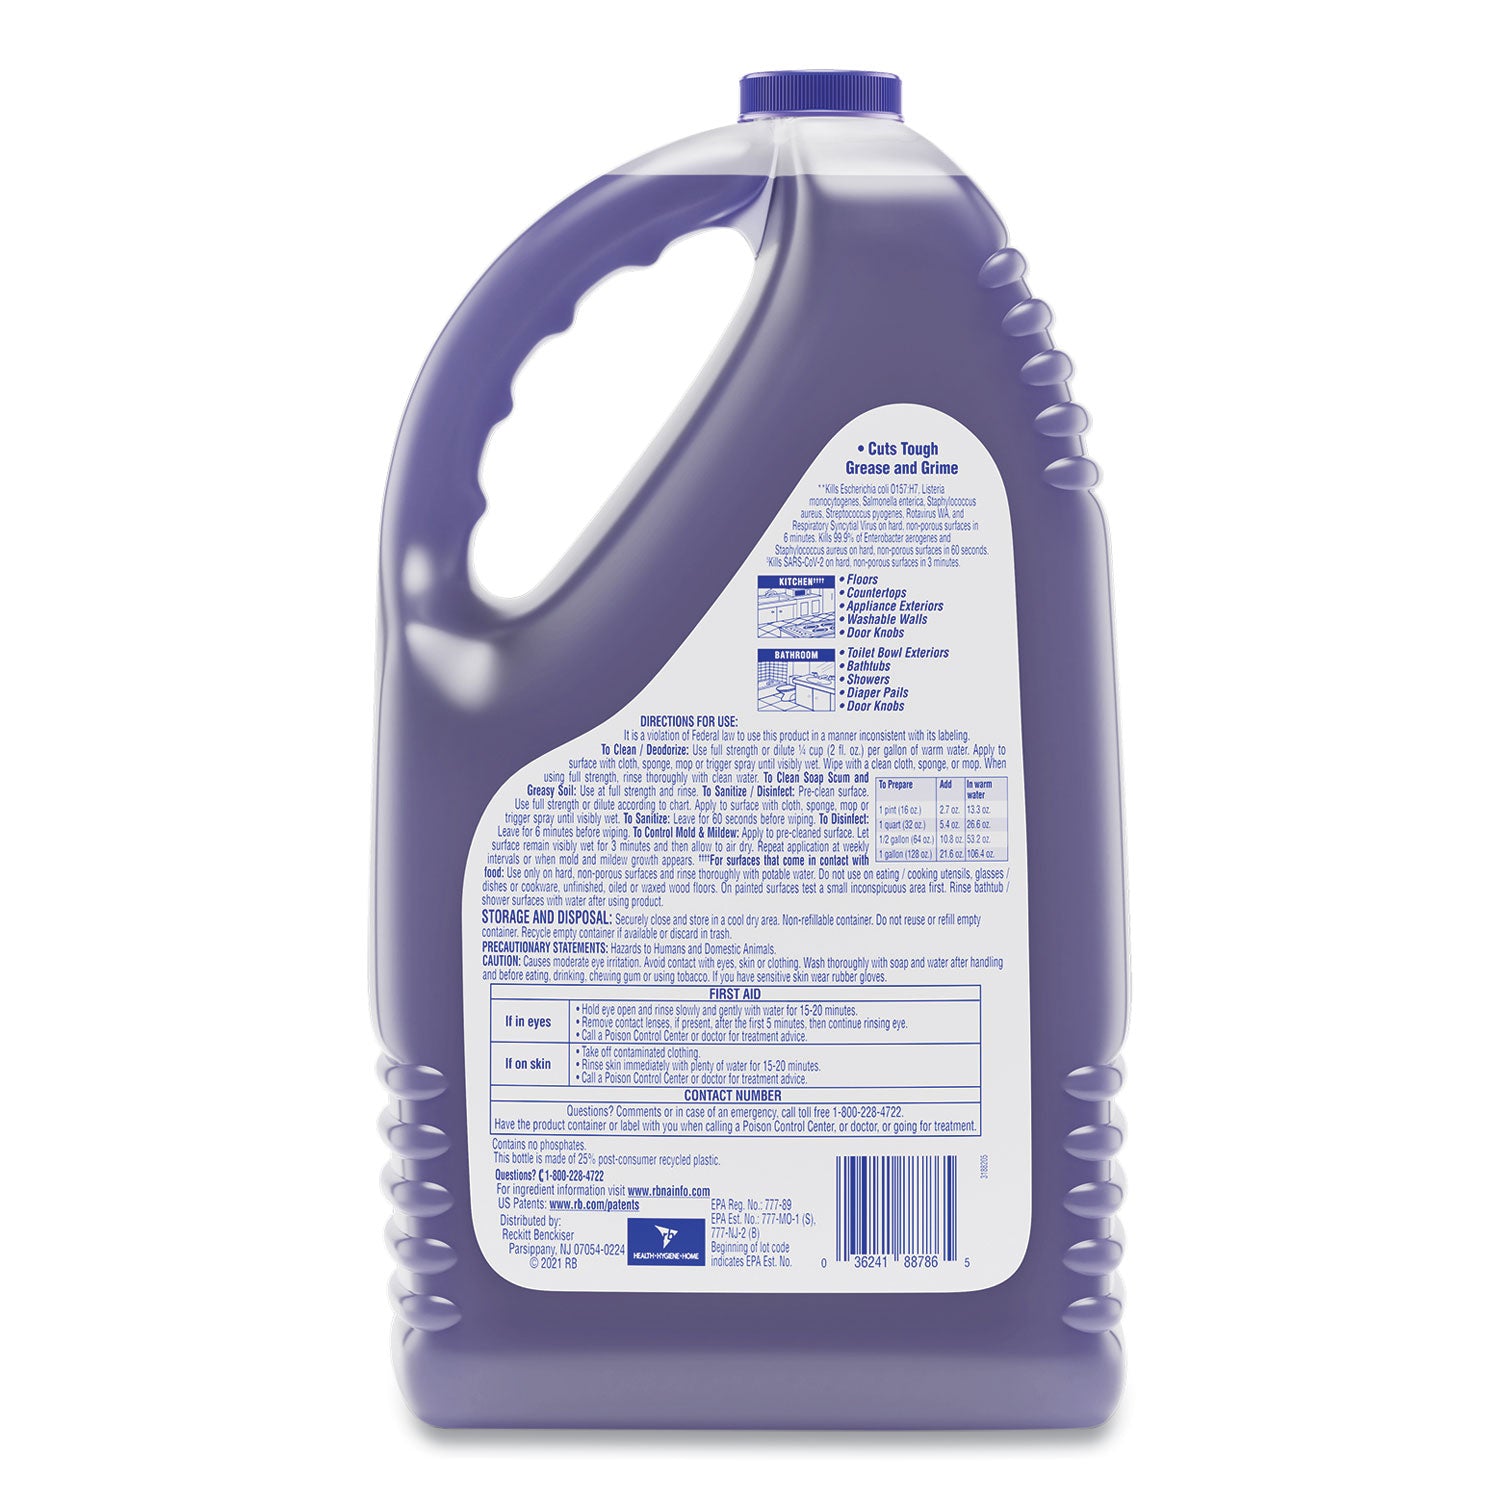 clean-and-fresh-multi-surface-cleaner-lavender-and-orchid-essence-144-oz-bottle_rac88786ea - 2